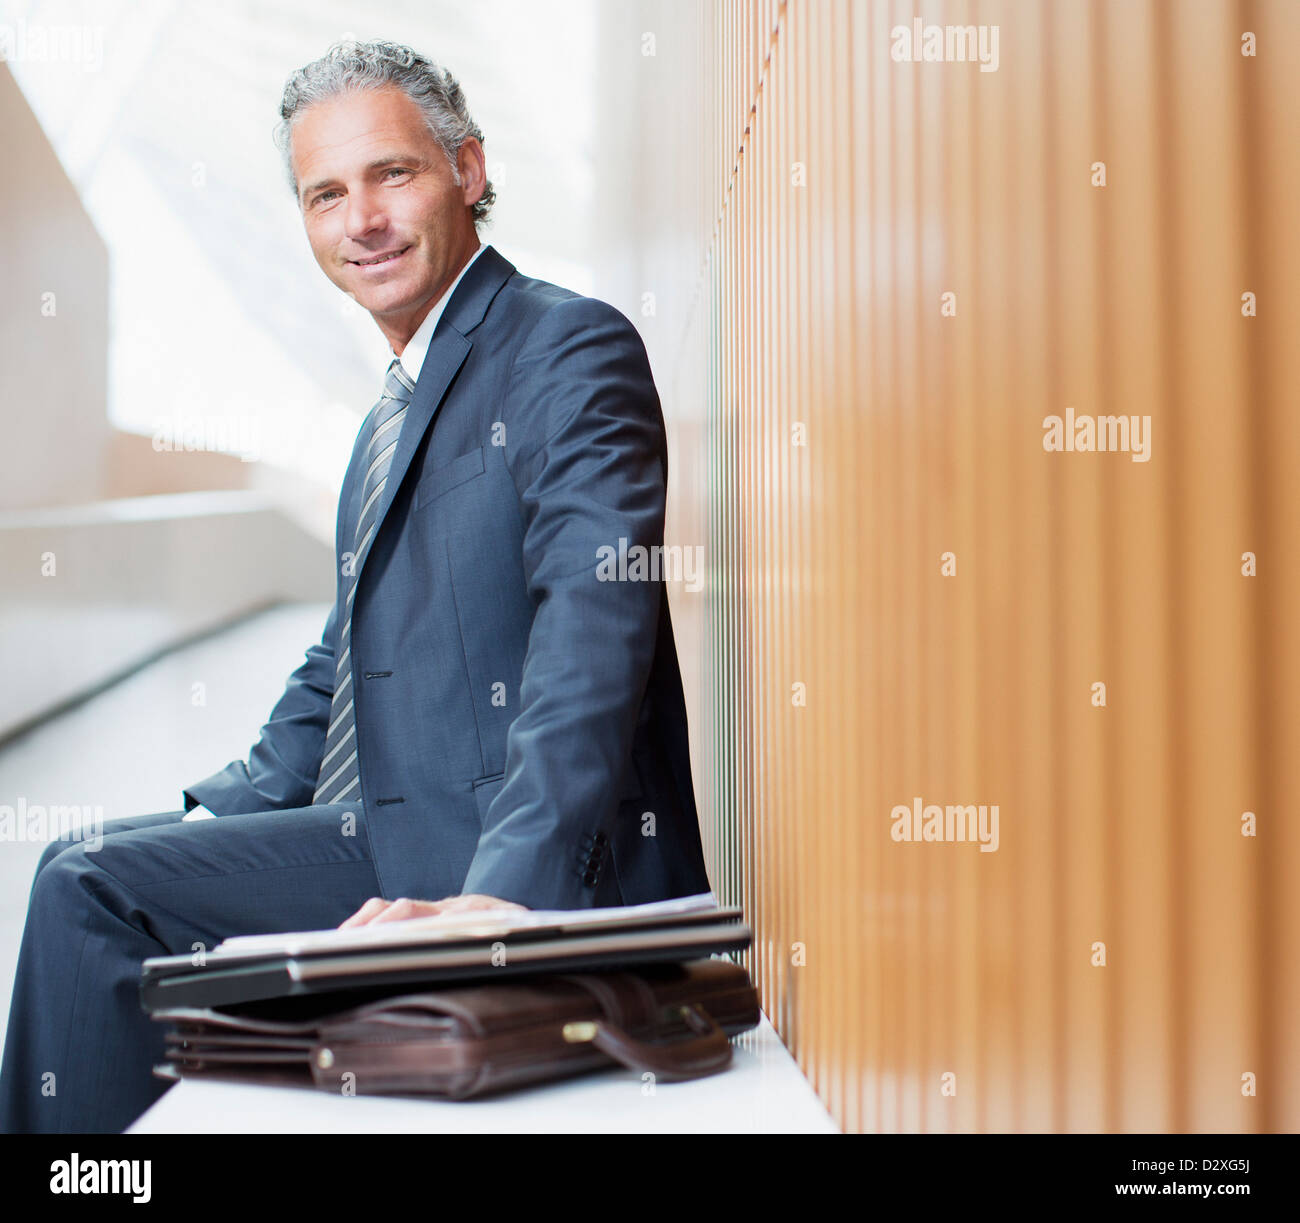 Portrait of smiling businessman with laptop and briefcase Banque D'Images